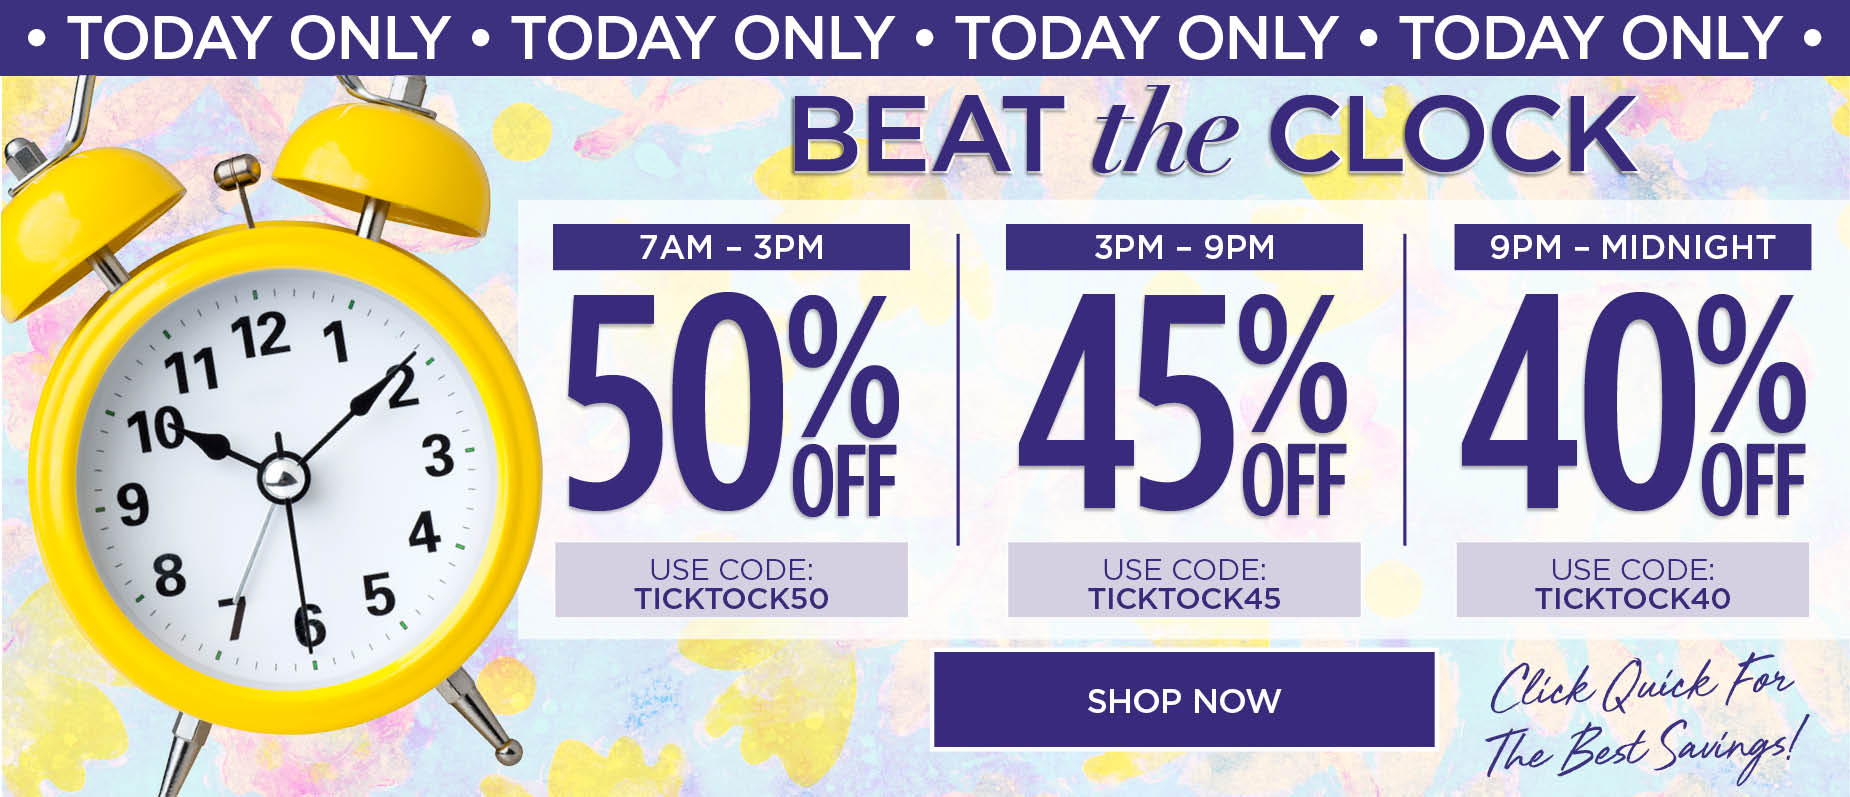 TODAY ONLY! BEAT THE CLOCK SALE! 50% OFF from 7AM to 3PM with code: TICK TOCK 50, 45% OFF from 3PM to 9PM with code: TICK TOCK 45, or 40% OFF from 9PM till Midnight with code: TICK TOCK 40.